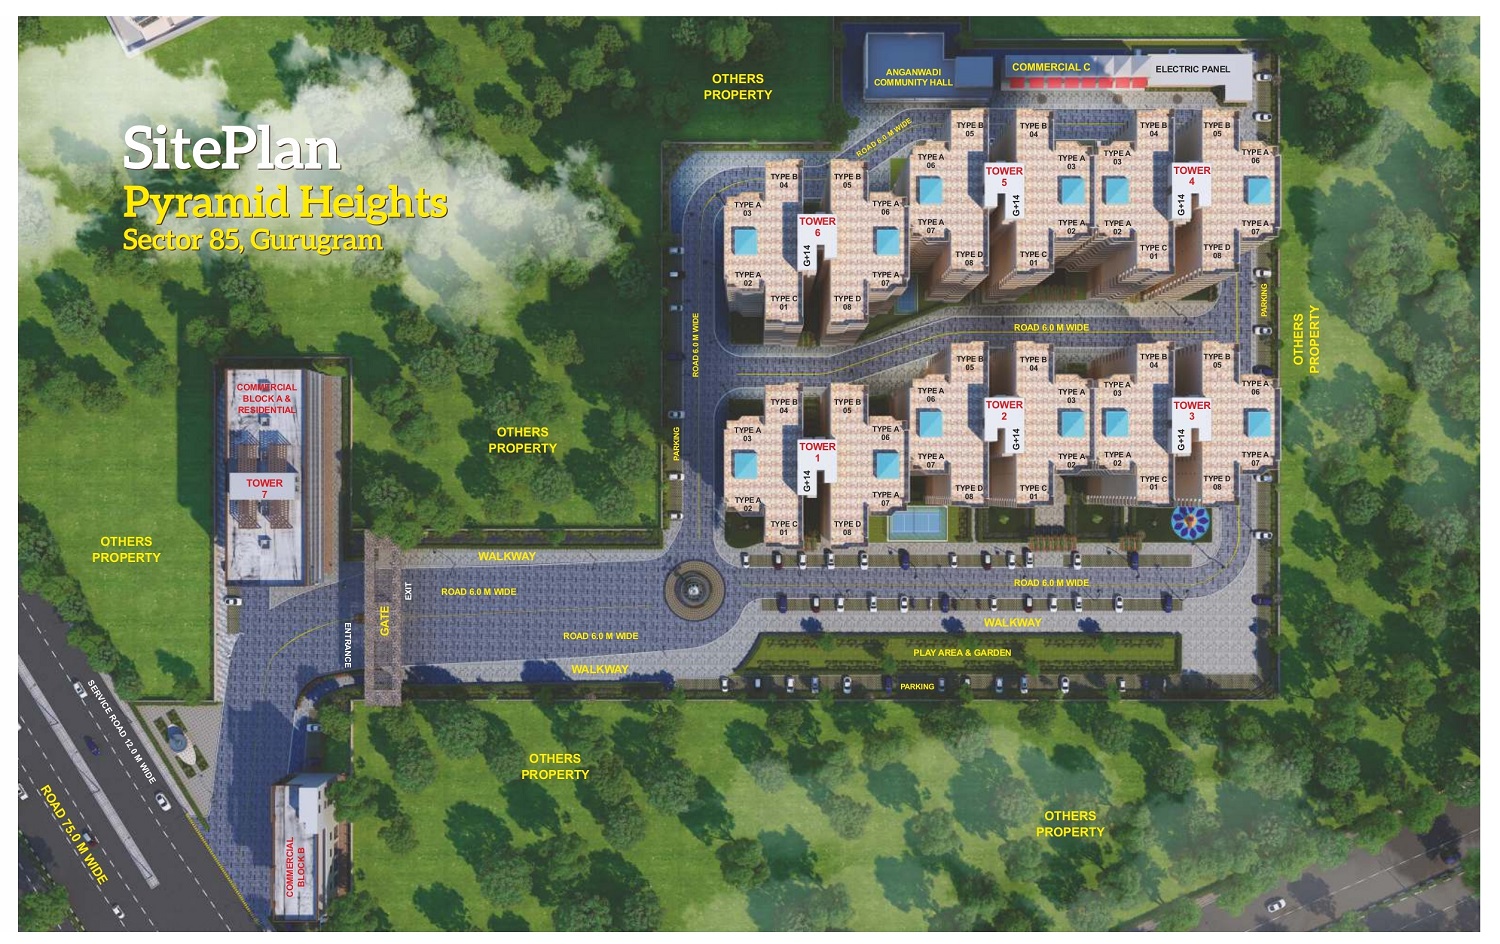 Pyramid Heights Sector 85 Site Plan